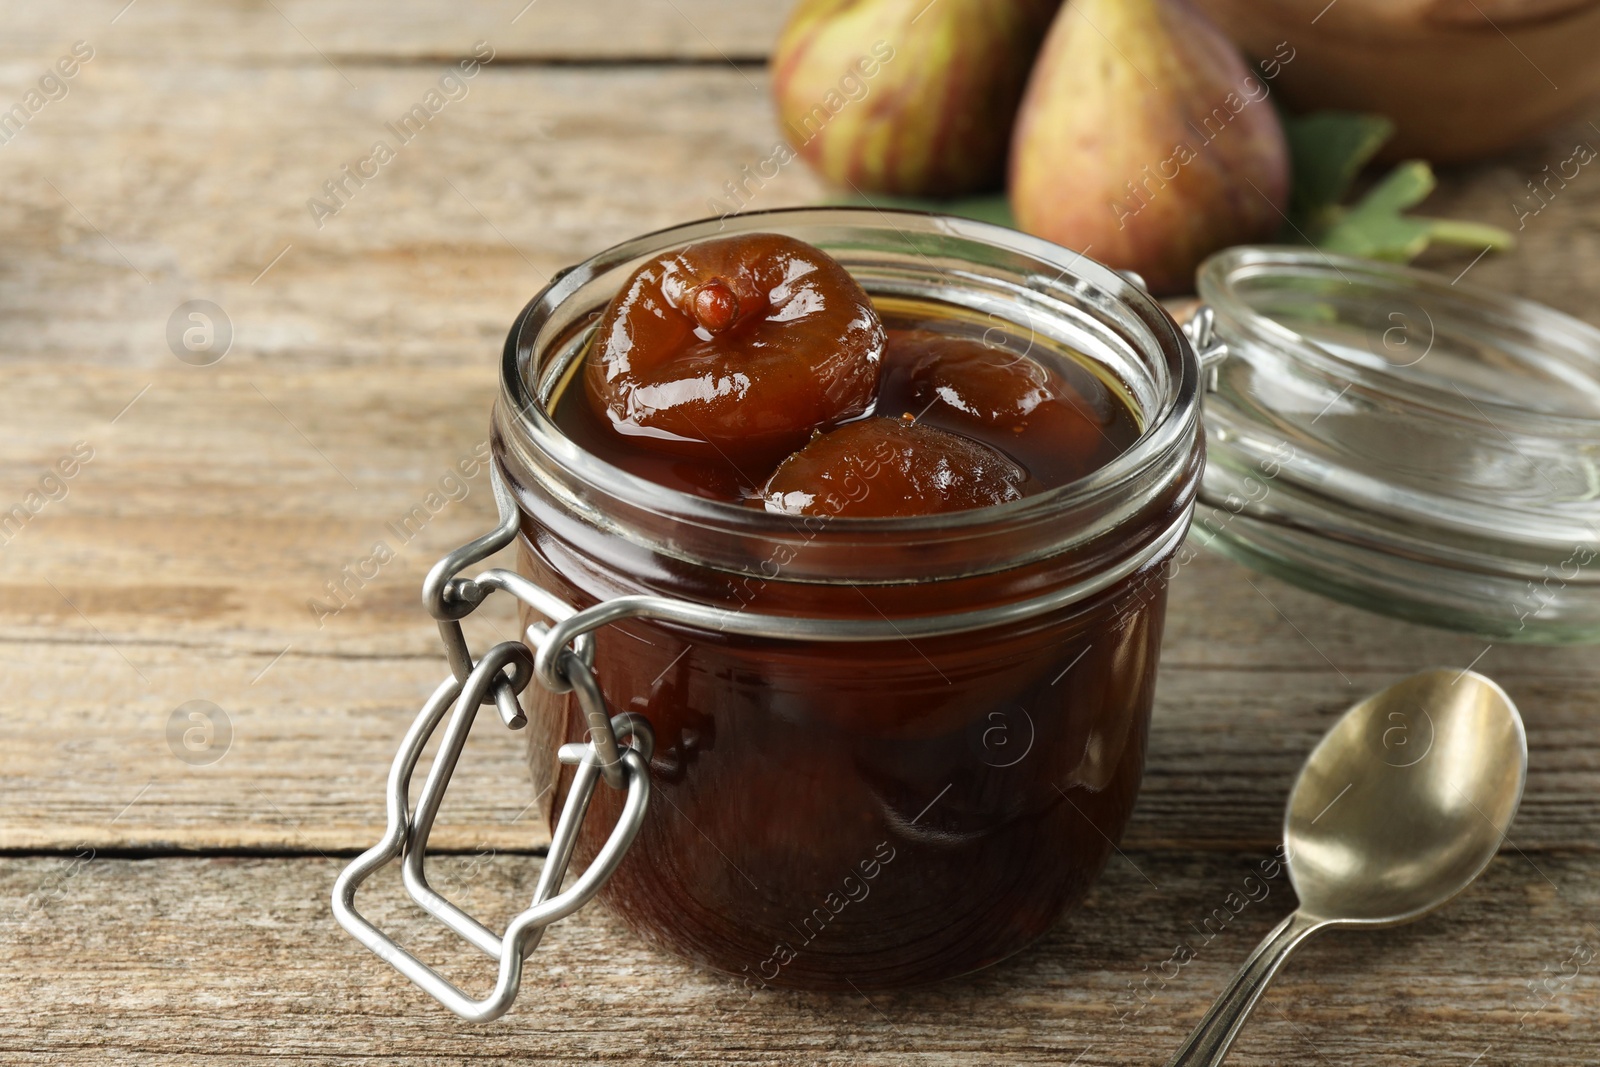 Photo of Jar of tasty sweet fig jam on wooden table